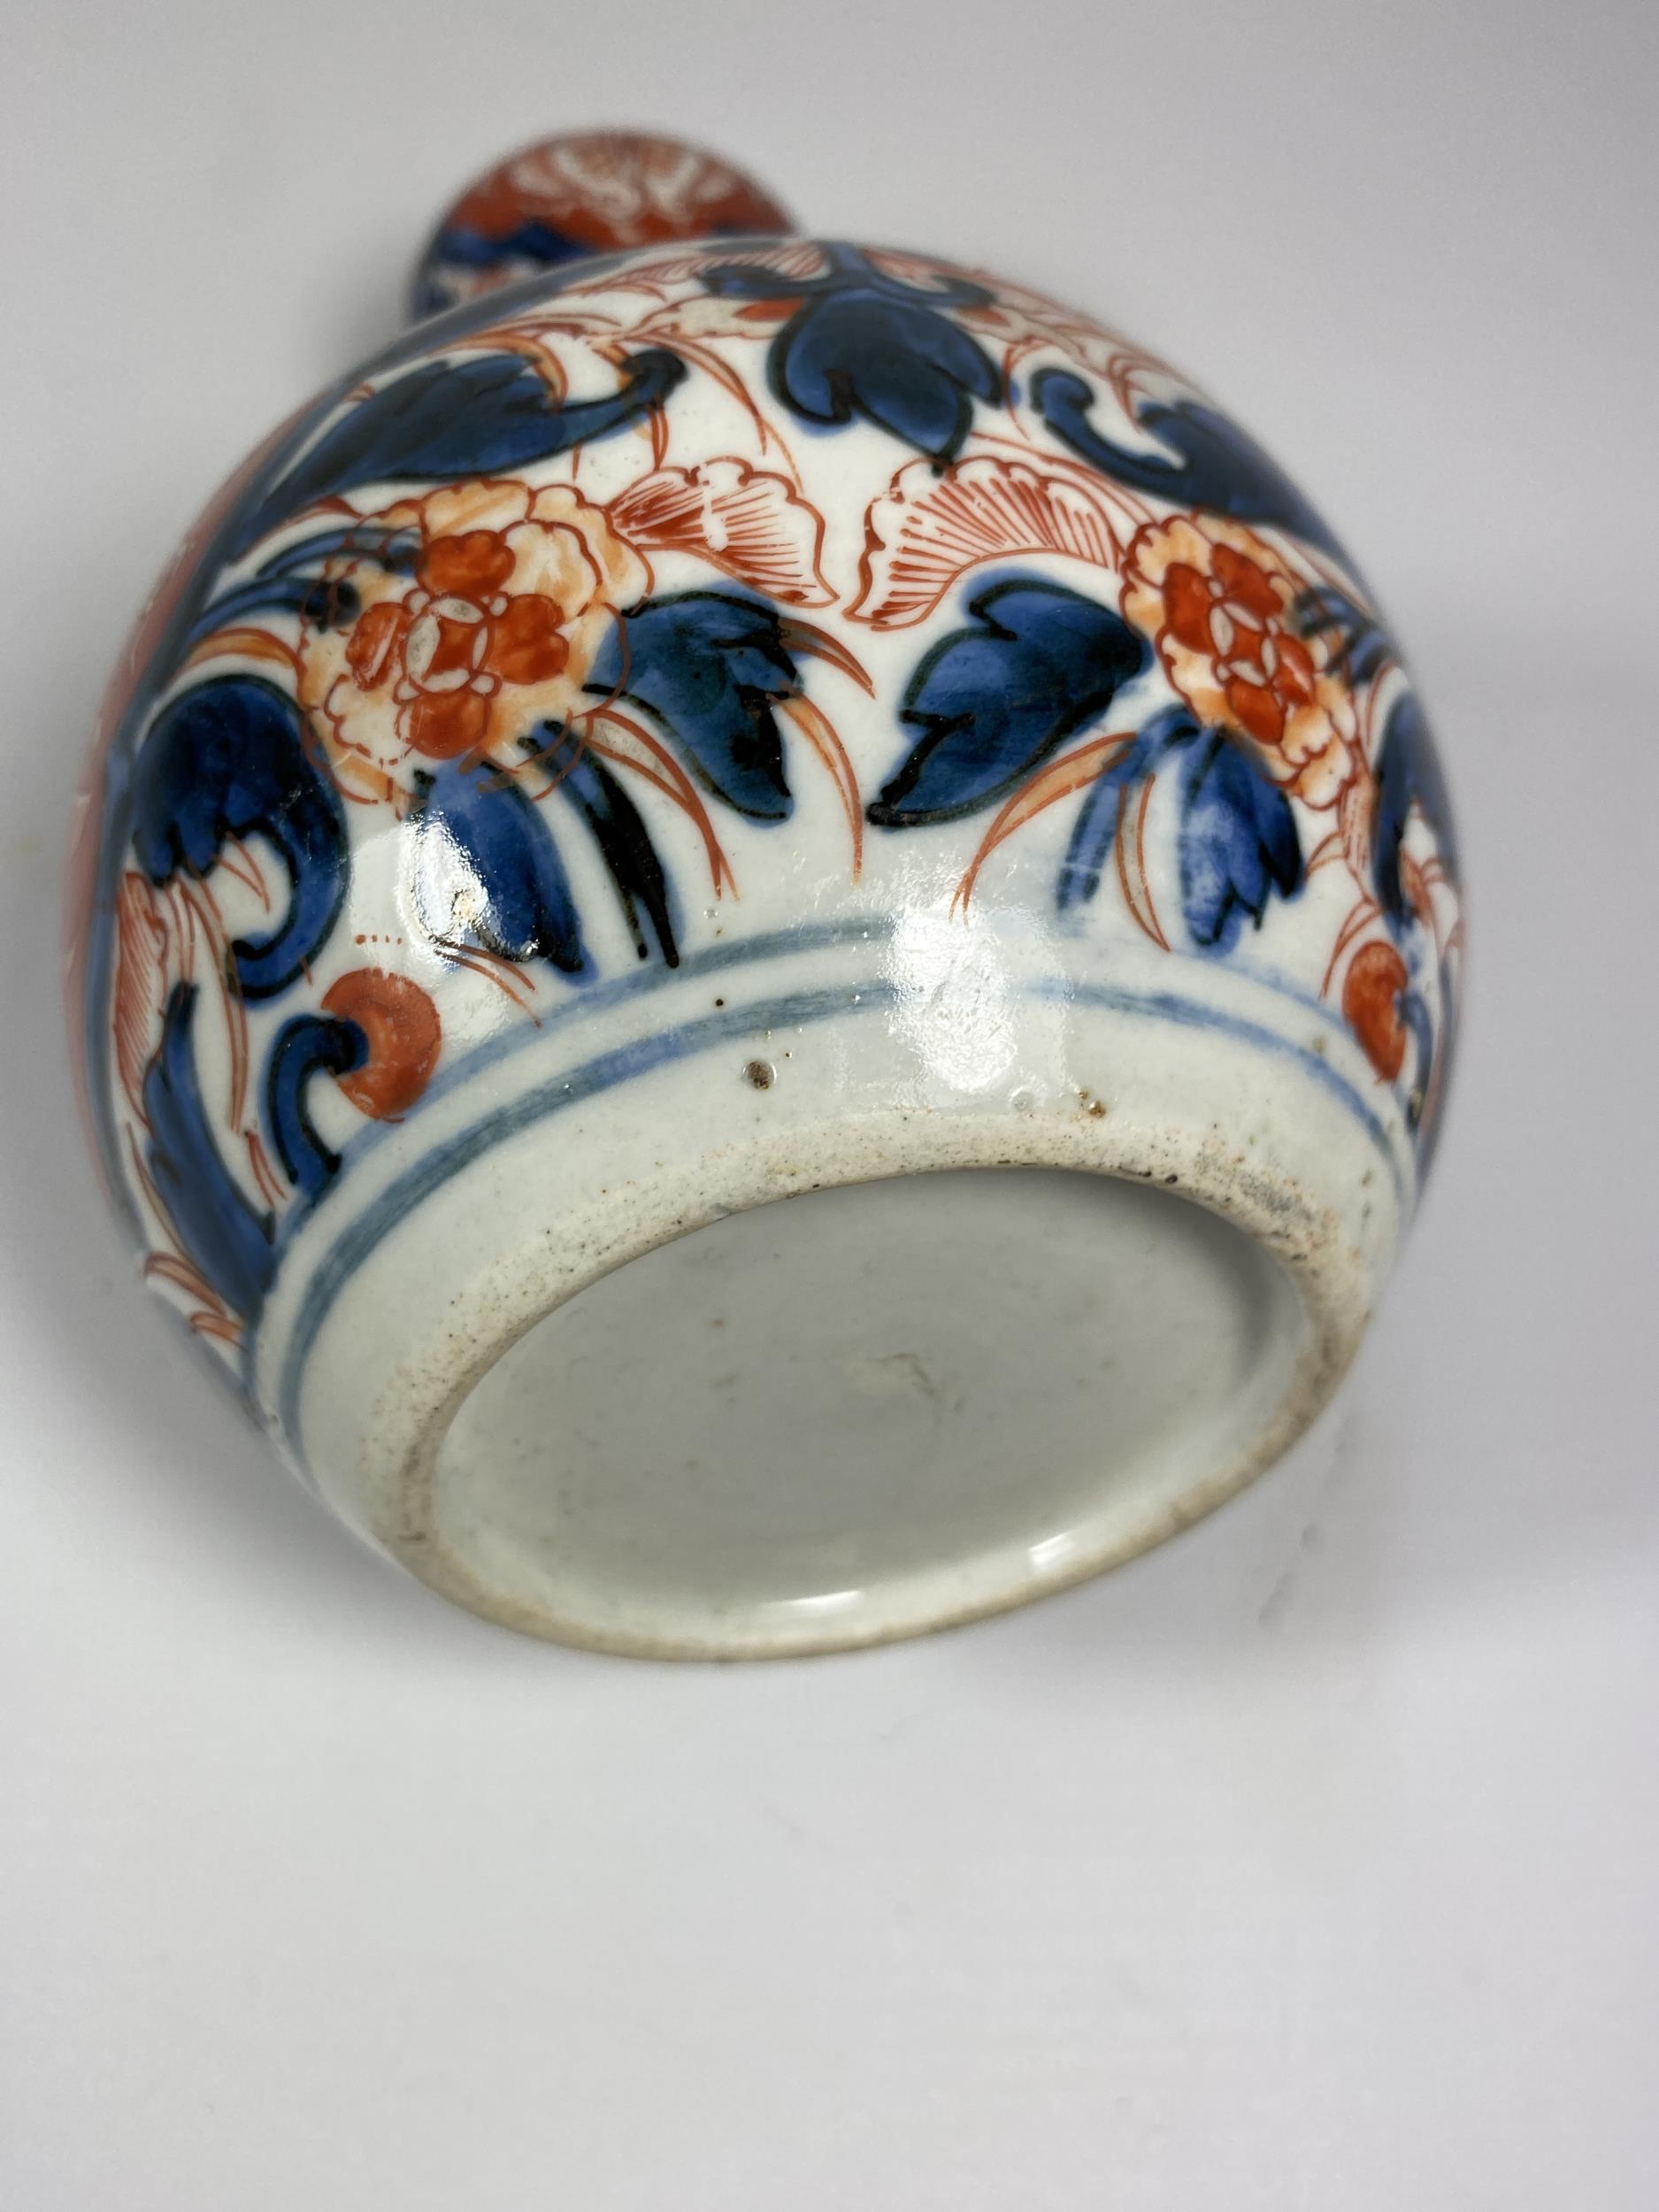 A JAPANESE IMARI MEIJI PERIOD (1868-1912) DOUBLE GOURD FORM BOTTLE VASE, HEIGHT 20CM - Image 5 of 5